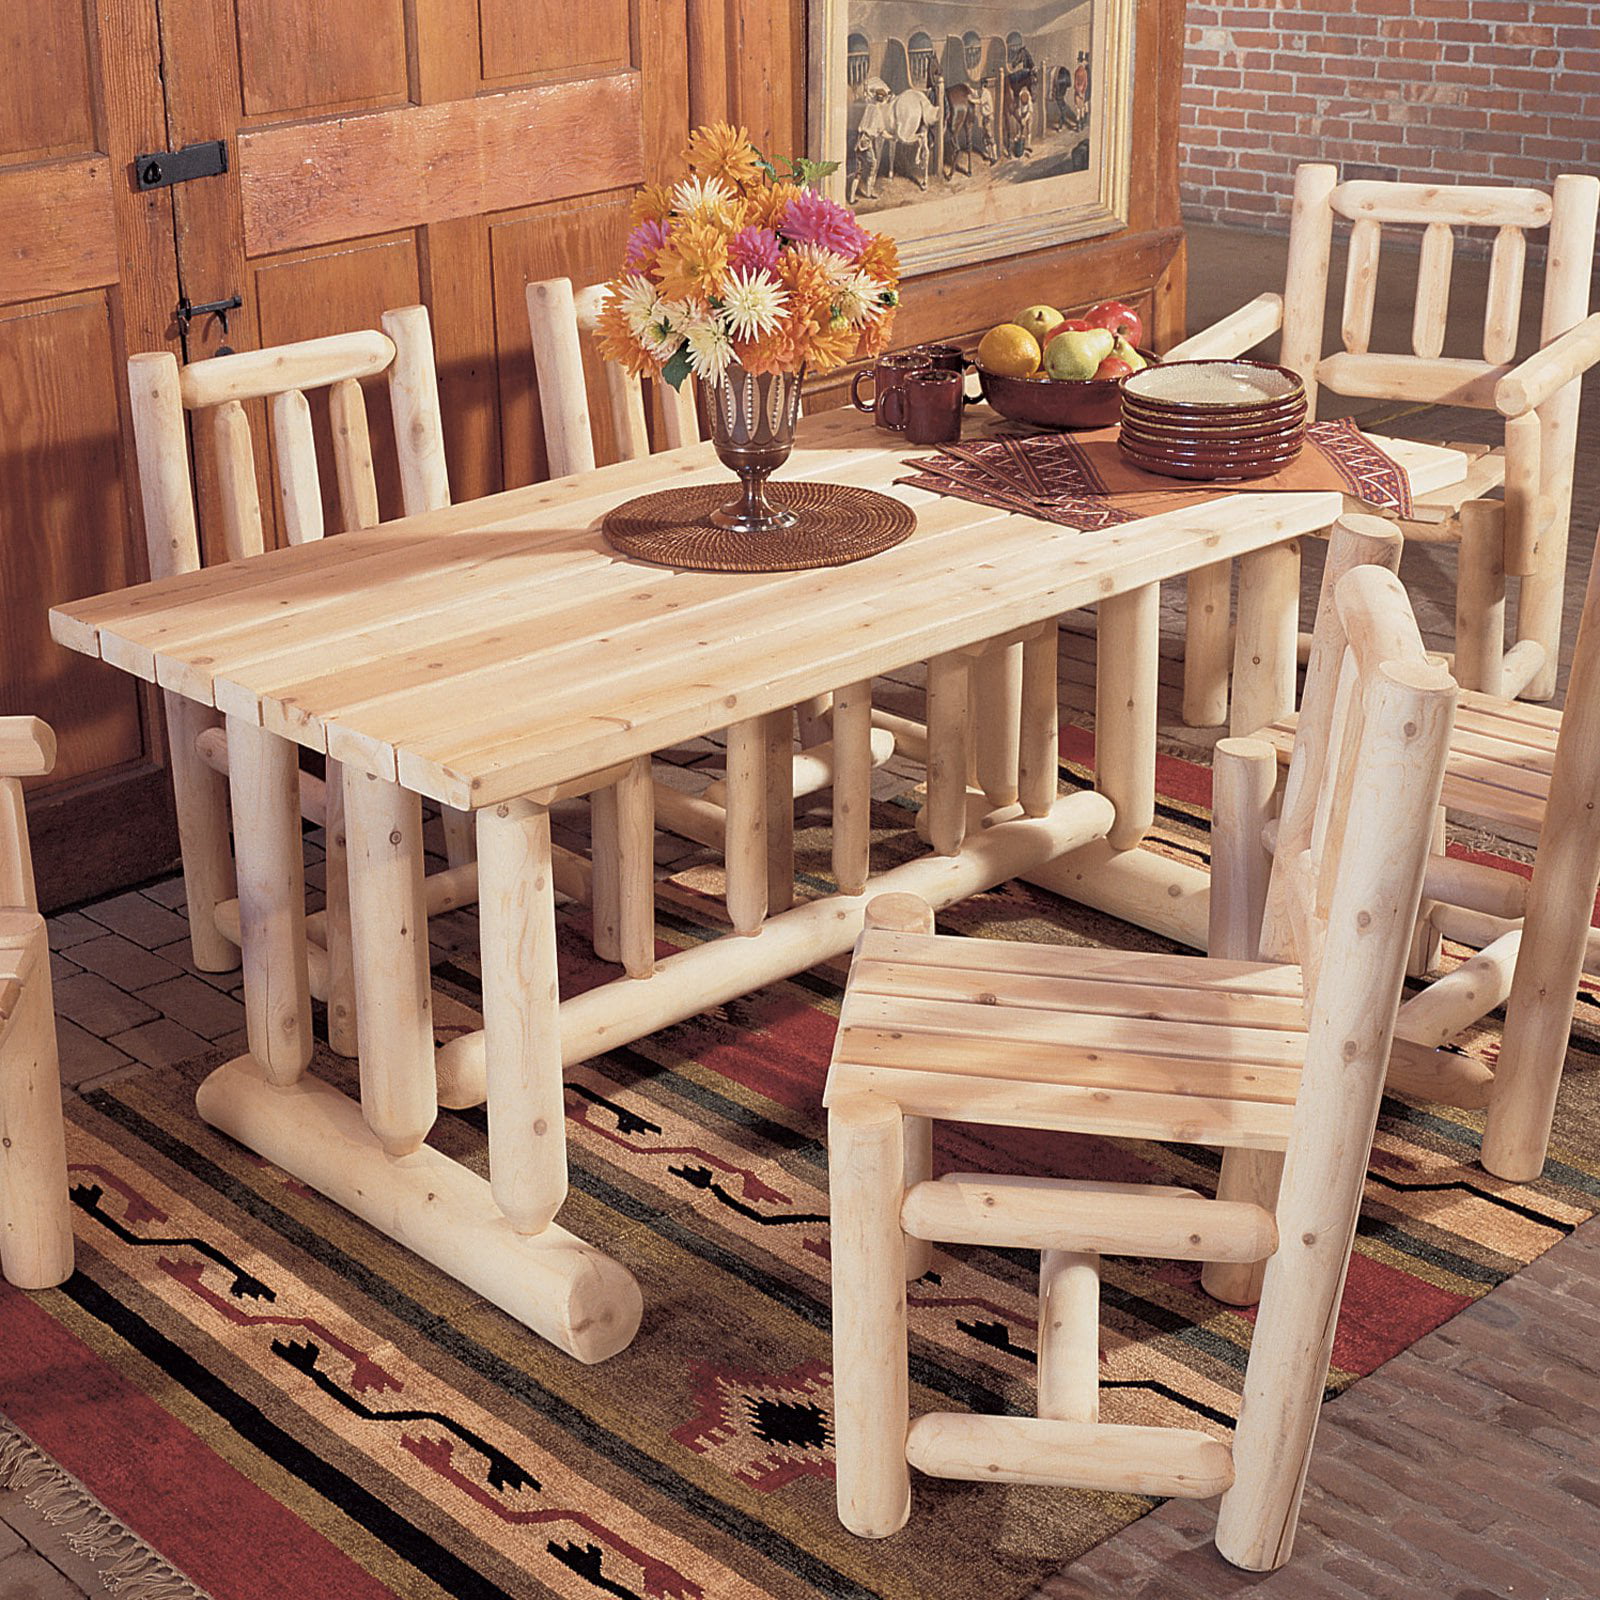 Rustic Natural Cedar Furniture Harvest, Cedar Dining Table And Chairs